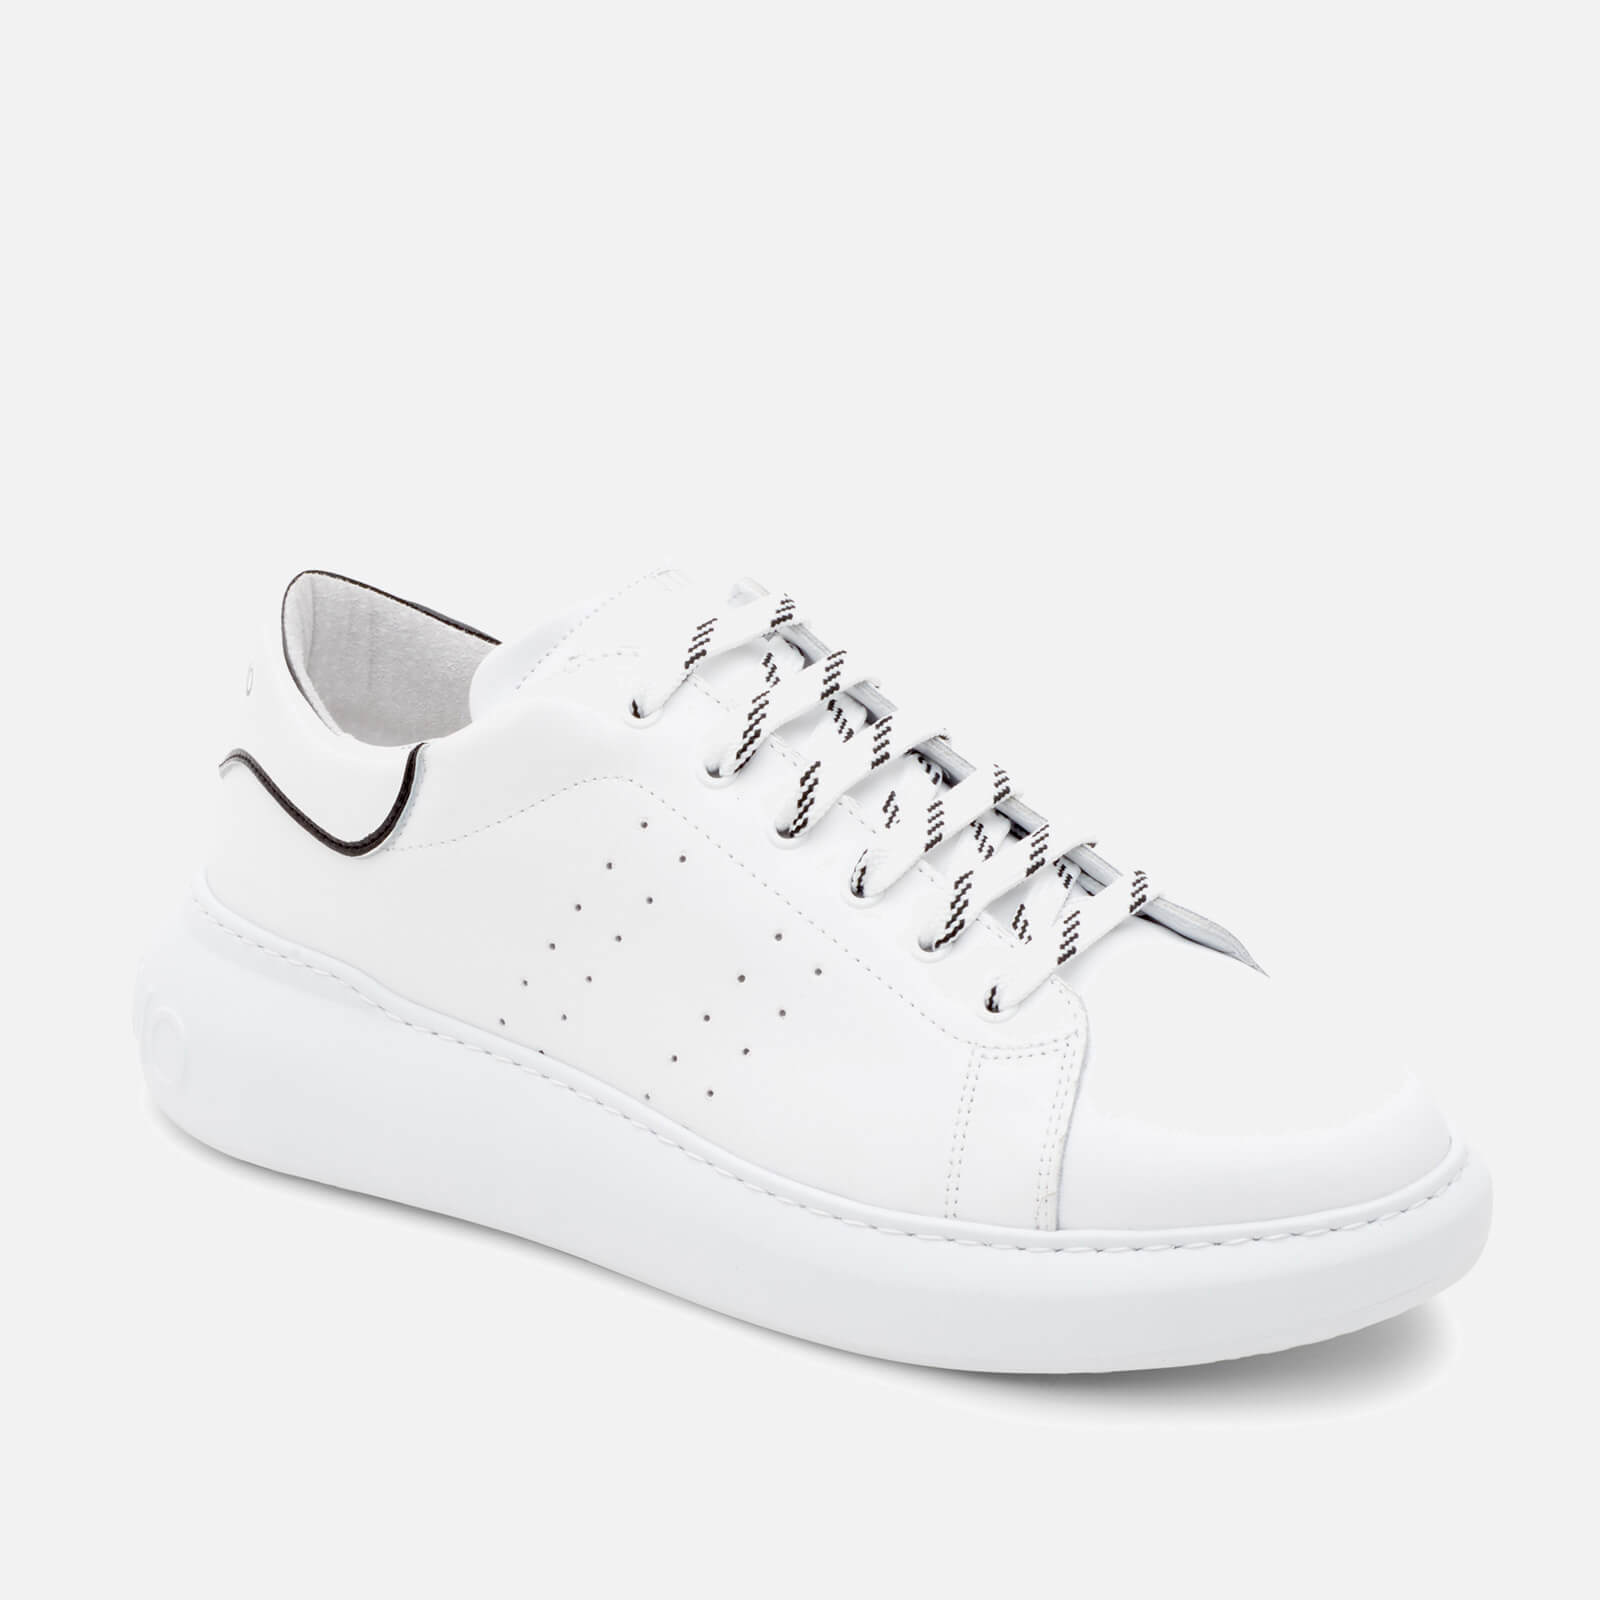 Valentino Shoes Women's Leather Chunky Trainers - White/White - UK 3